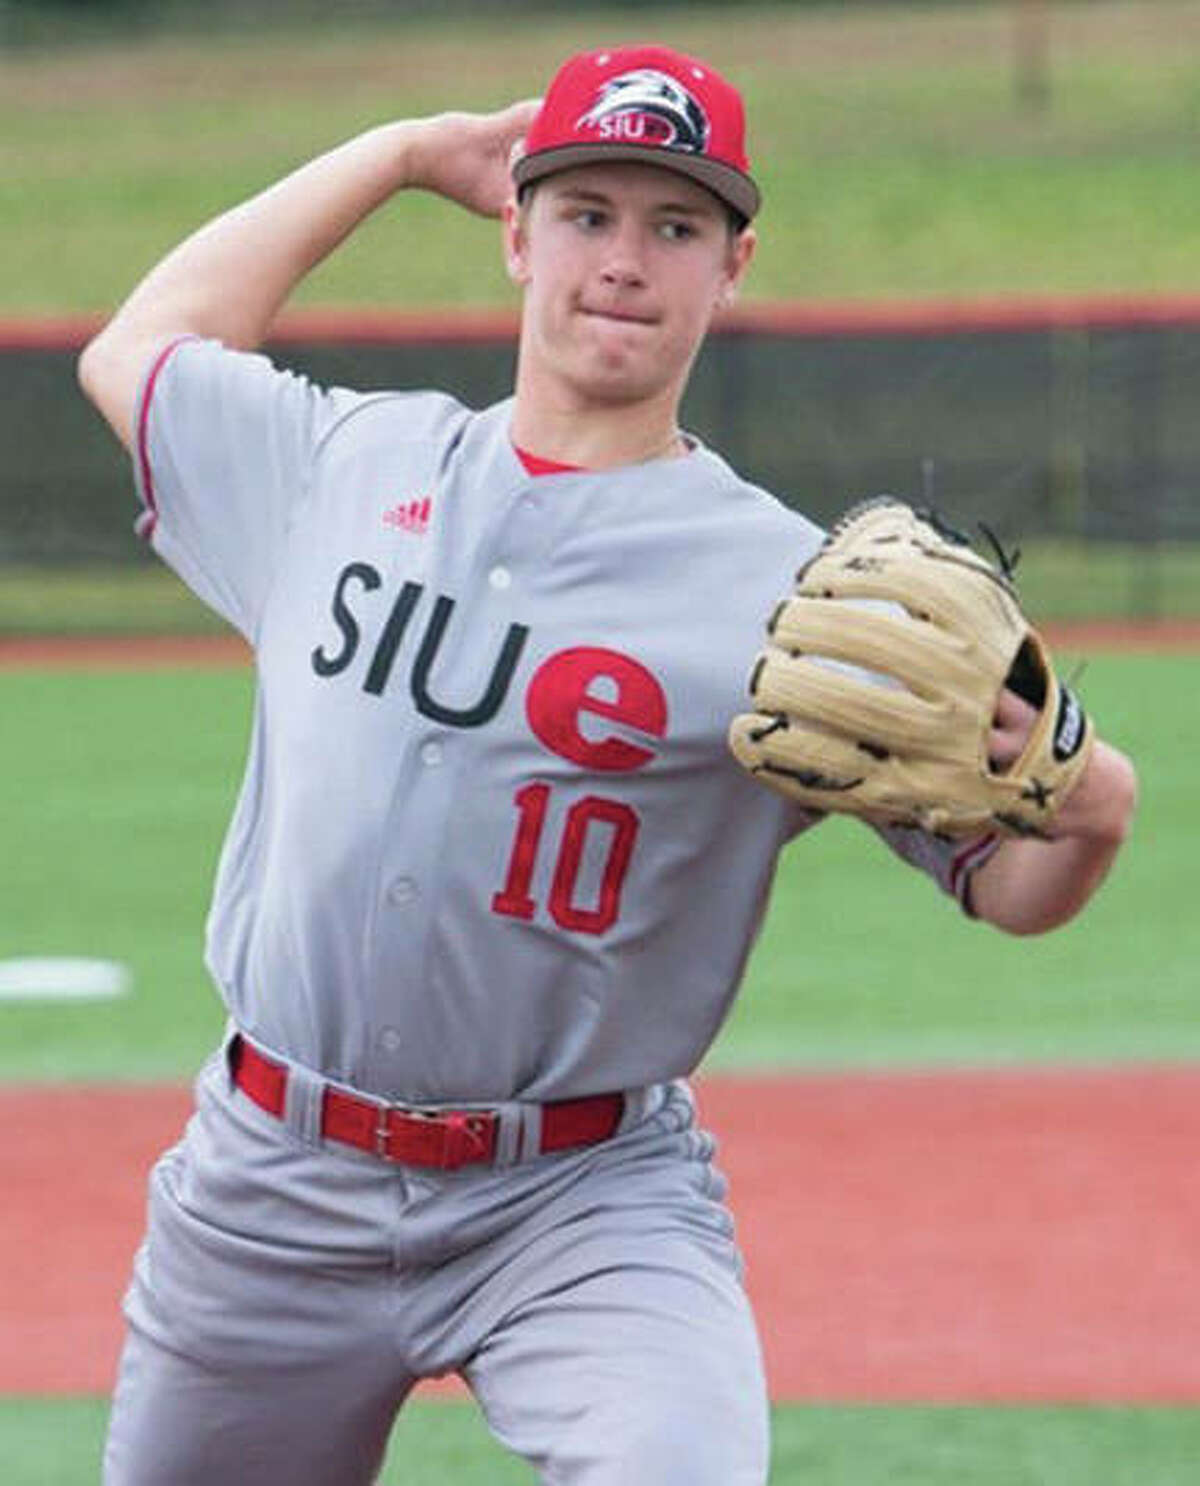 SIUE pitcher Kenny Serwa was a unanimous choice as the Ohio Valley conference Pitcher of the week after a dominating performance in Saturday’s win over Samford.